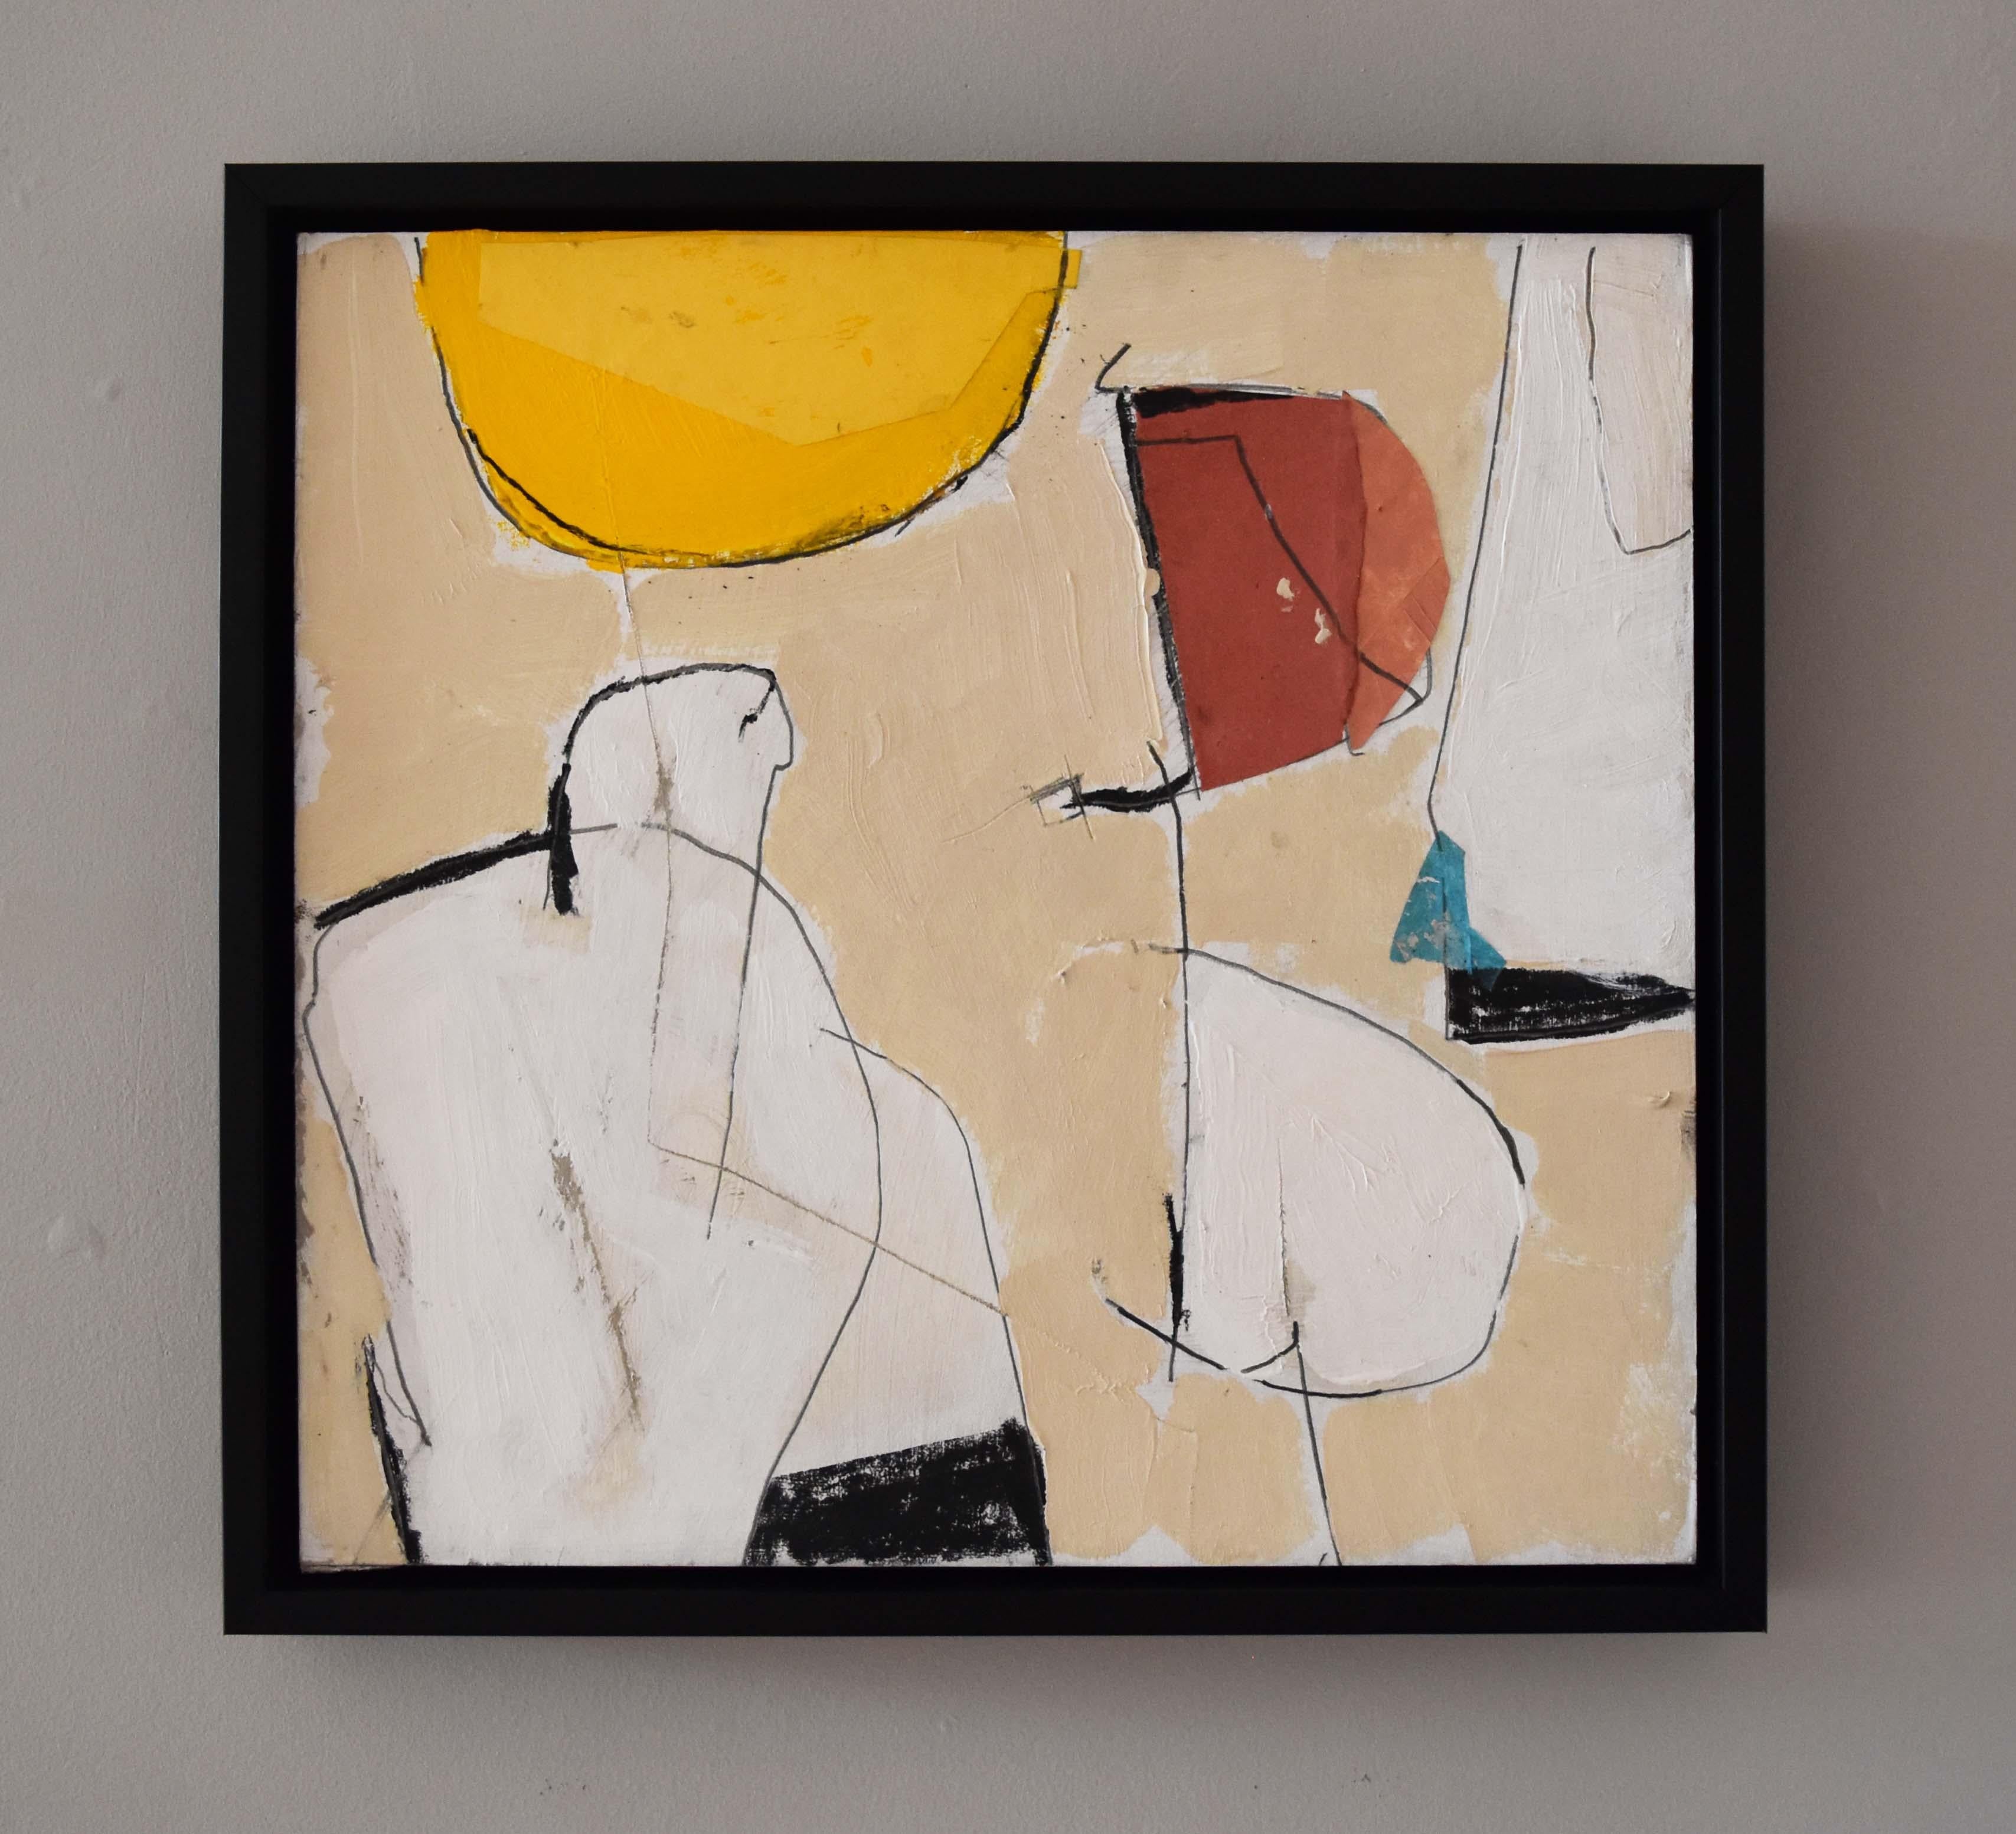 Andrew Johnstone’s (British, 1933 – 2015) work rarely varies from a select series of themes usually from the ancient world and his techniques and idioms often stem from the modern artists he admired: Roger Hilton, Ben Nicholson and William Scott.